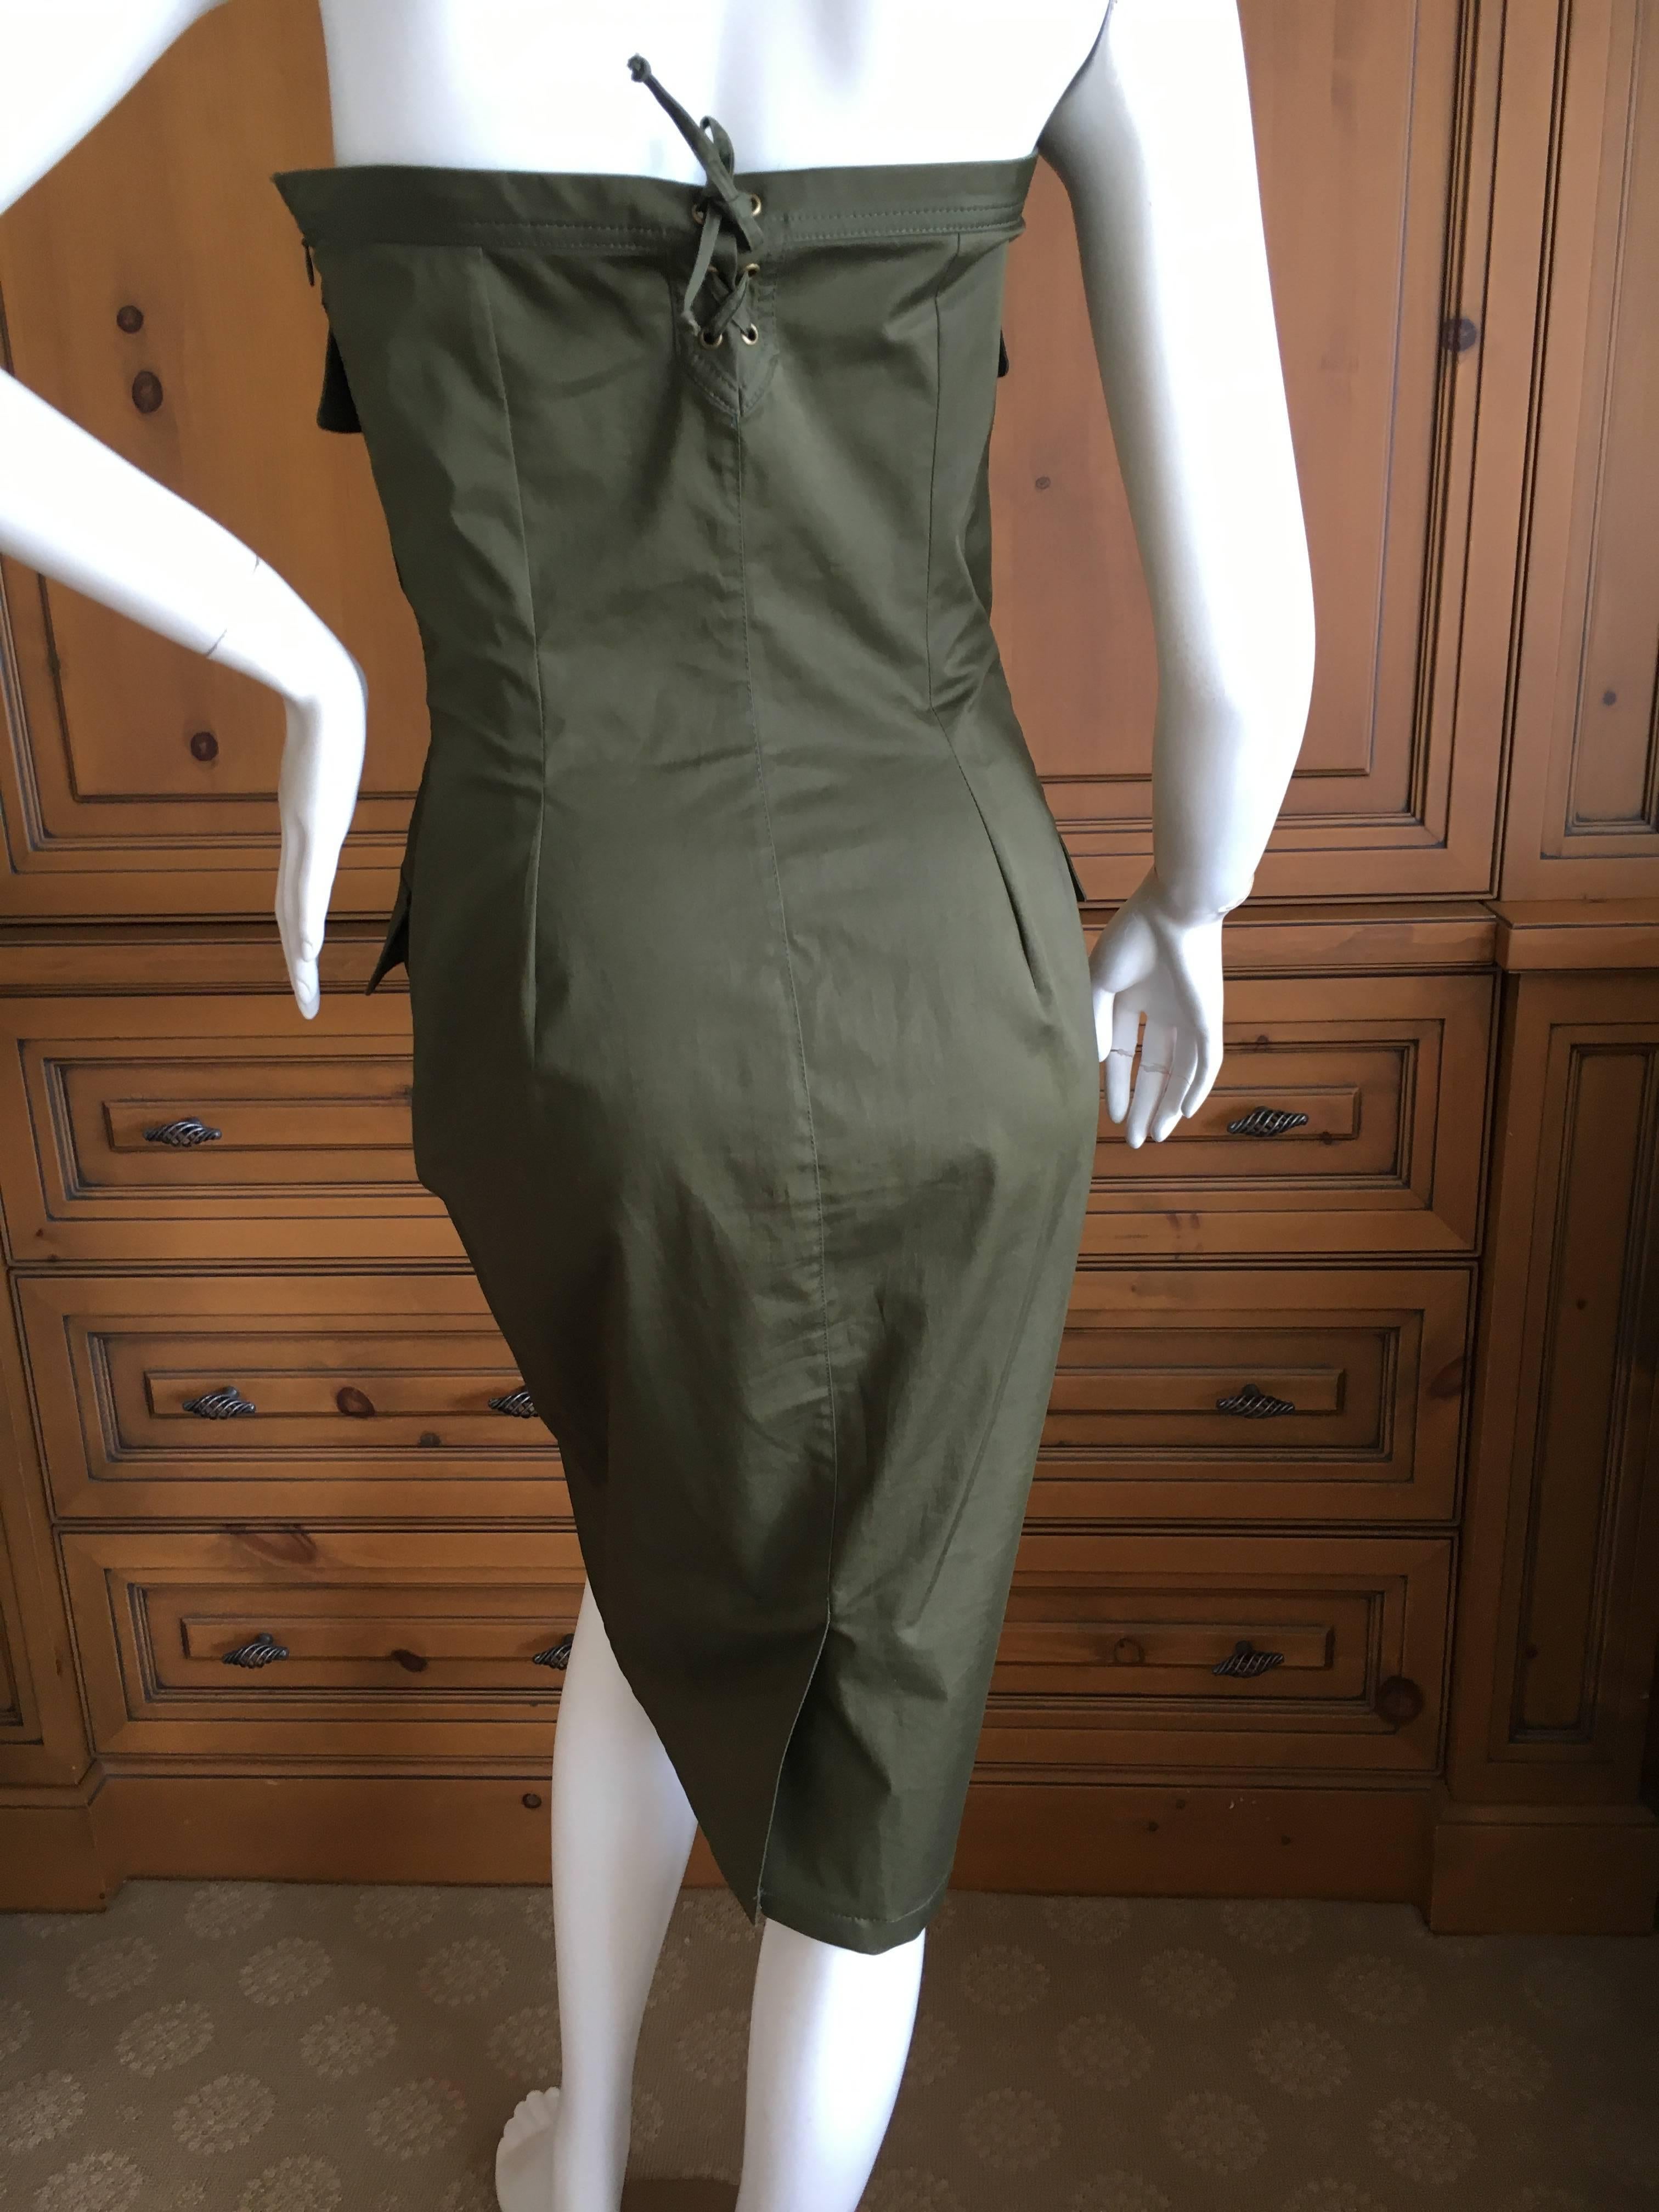 Yves Saint Laurent by Tom Ford Strapless Safari Dress with Corset Lacing In Excellent Condition For Sale In Cloverdale, CA